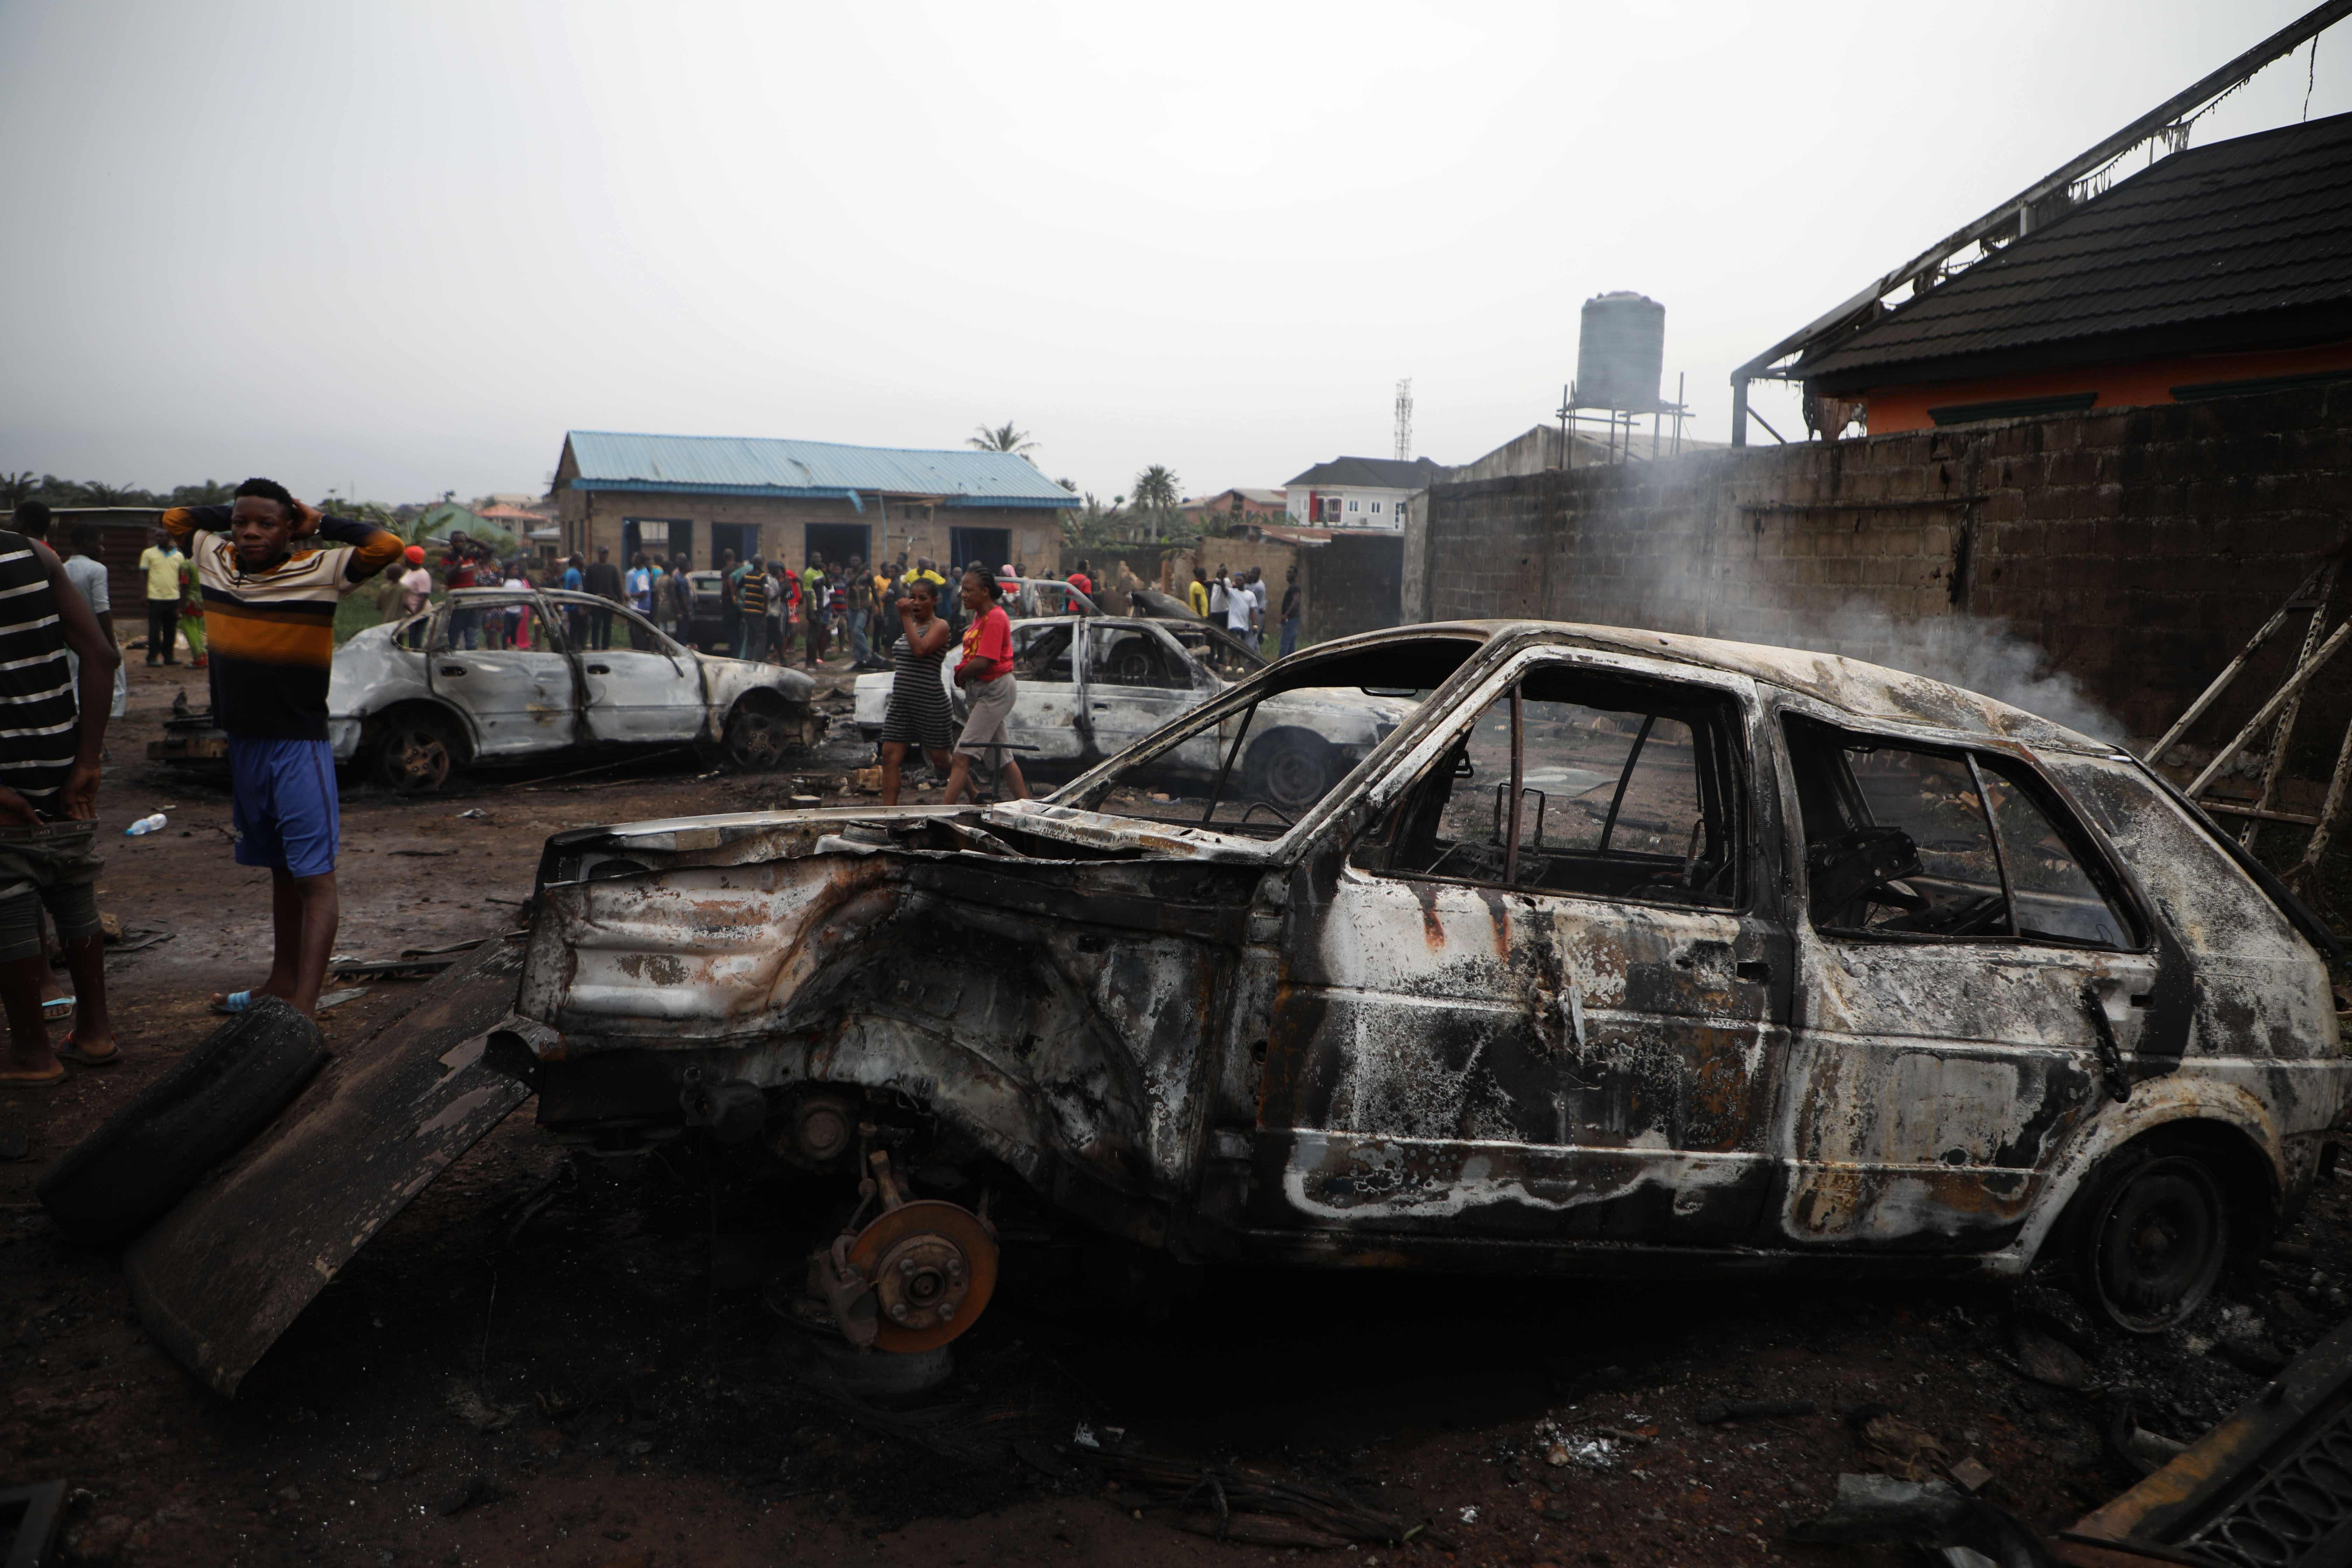 A tanker conveying gasoline exploded at Iju-Ishaga district of Lagos, leaving over a dozen of persons critically injured and several buildings and vehicles destroyed. The gas explosion which was reported to have killed 1 and injured about a dozen of victims according to Lagos State Emergency Response Unit. Credit: AFP